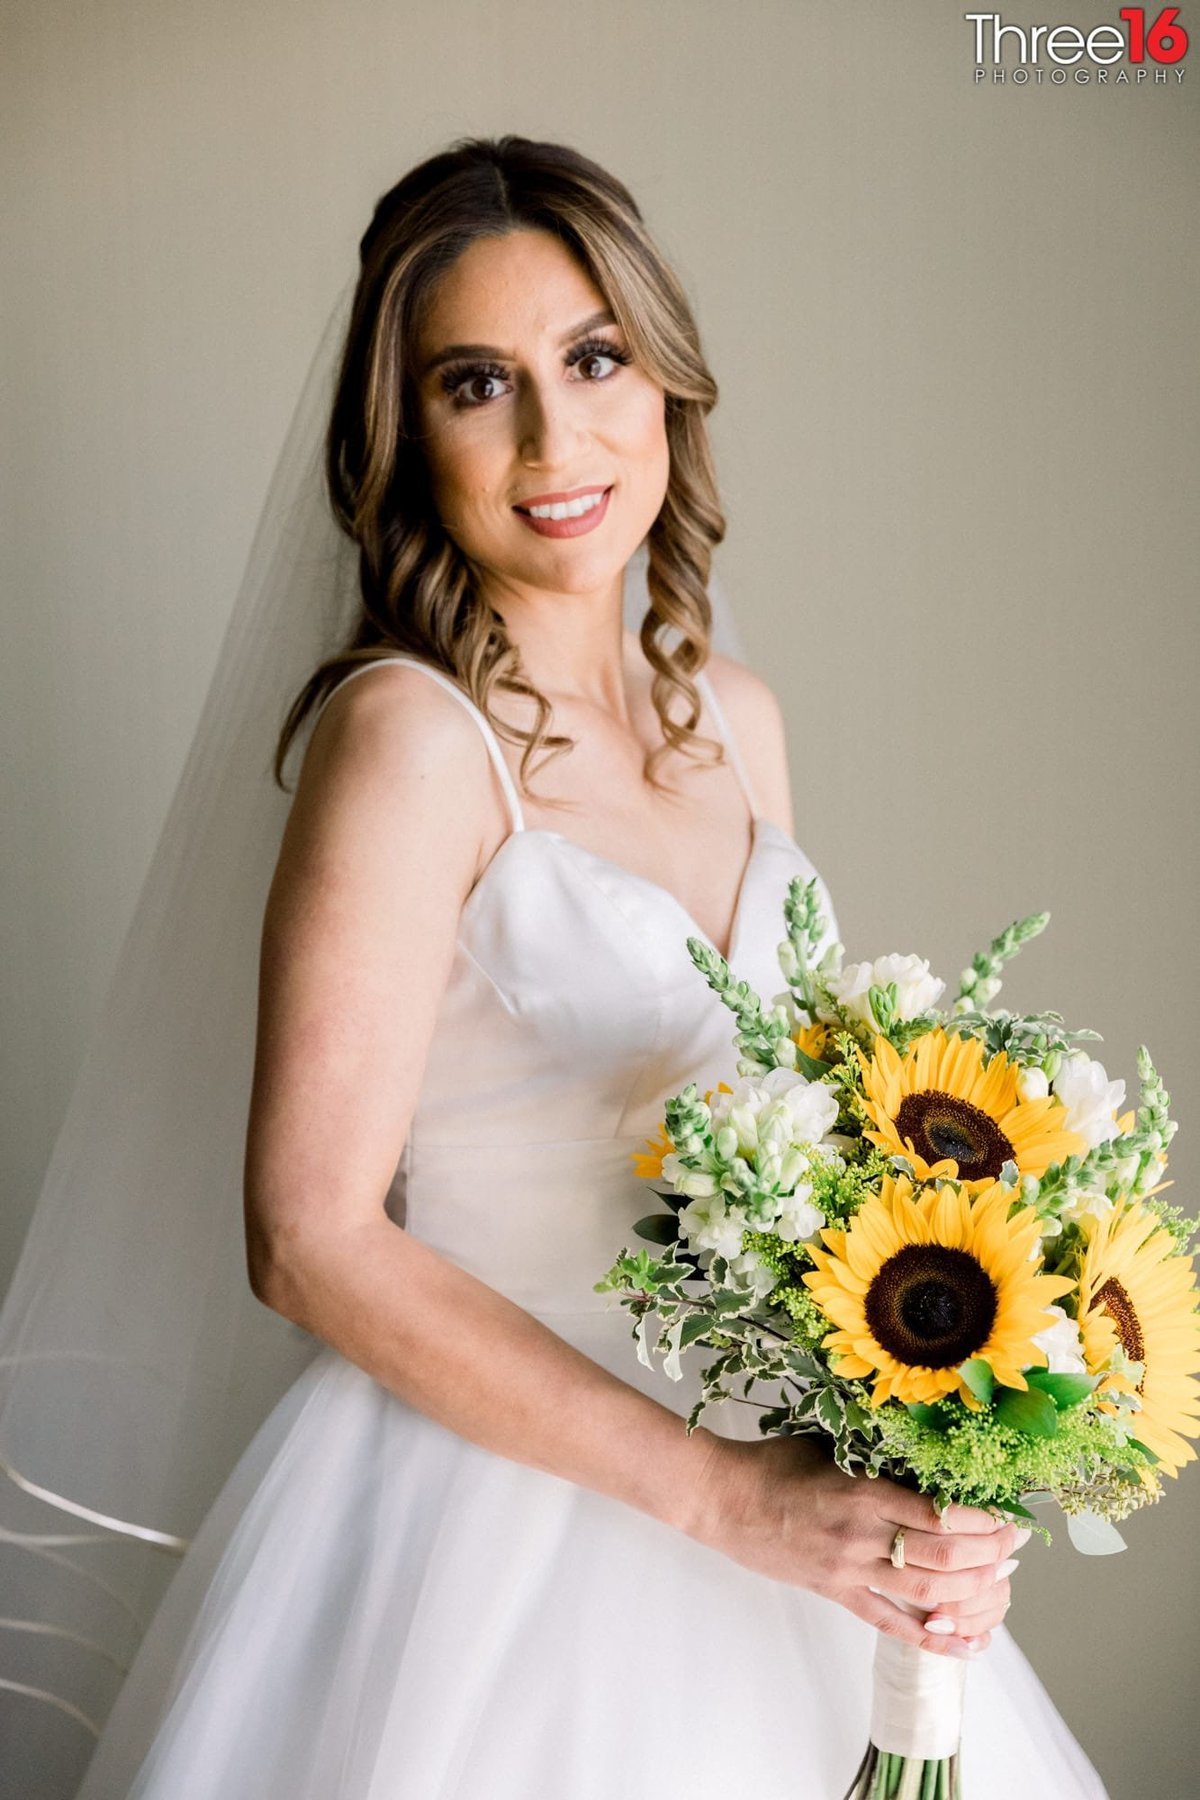 Beautiful Bride poses of the photos holding her sunflower bouquet of flowers